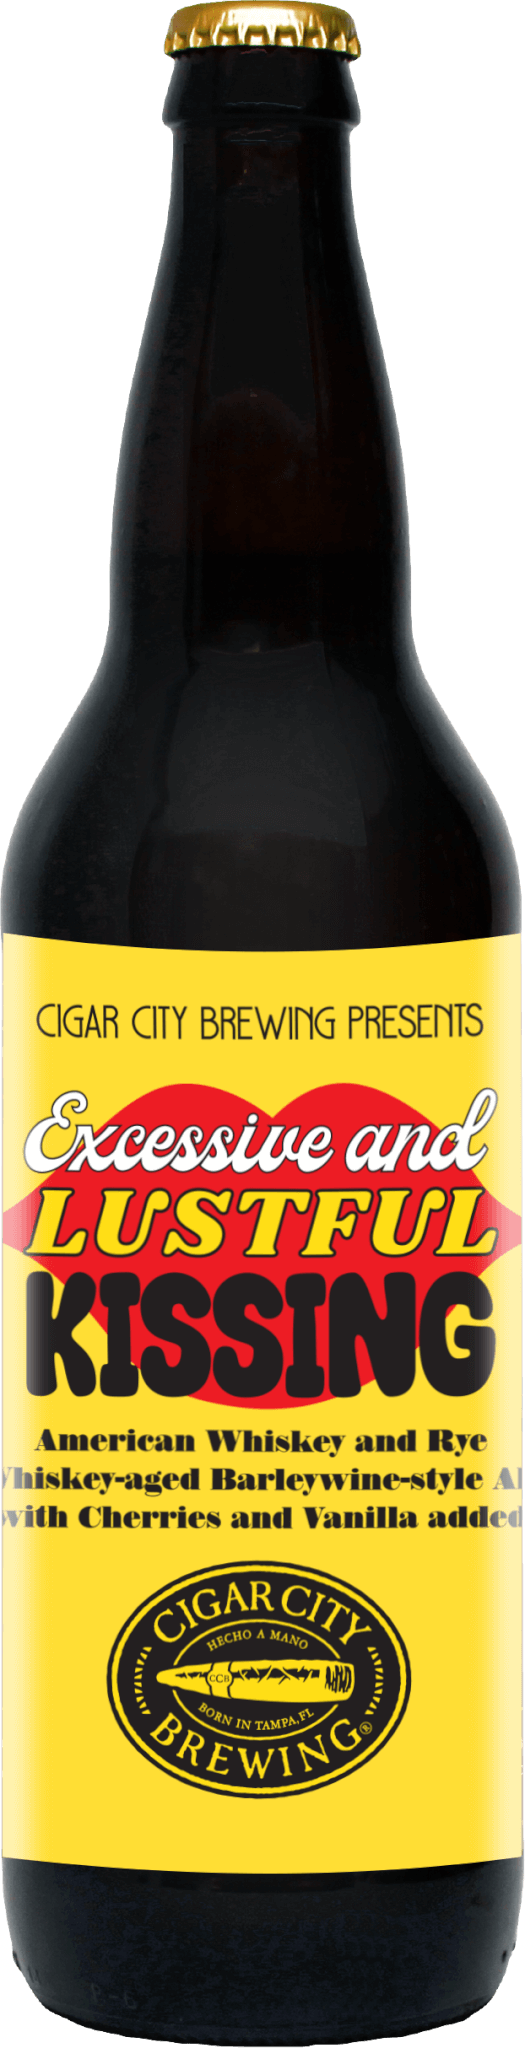 Excessive and Lustful Kissing